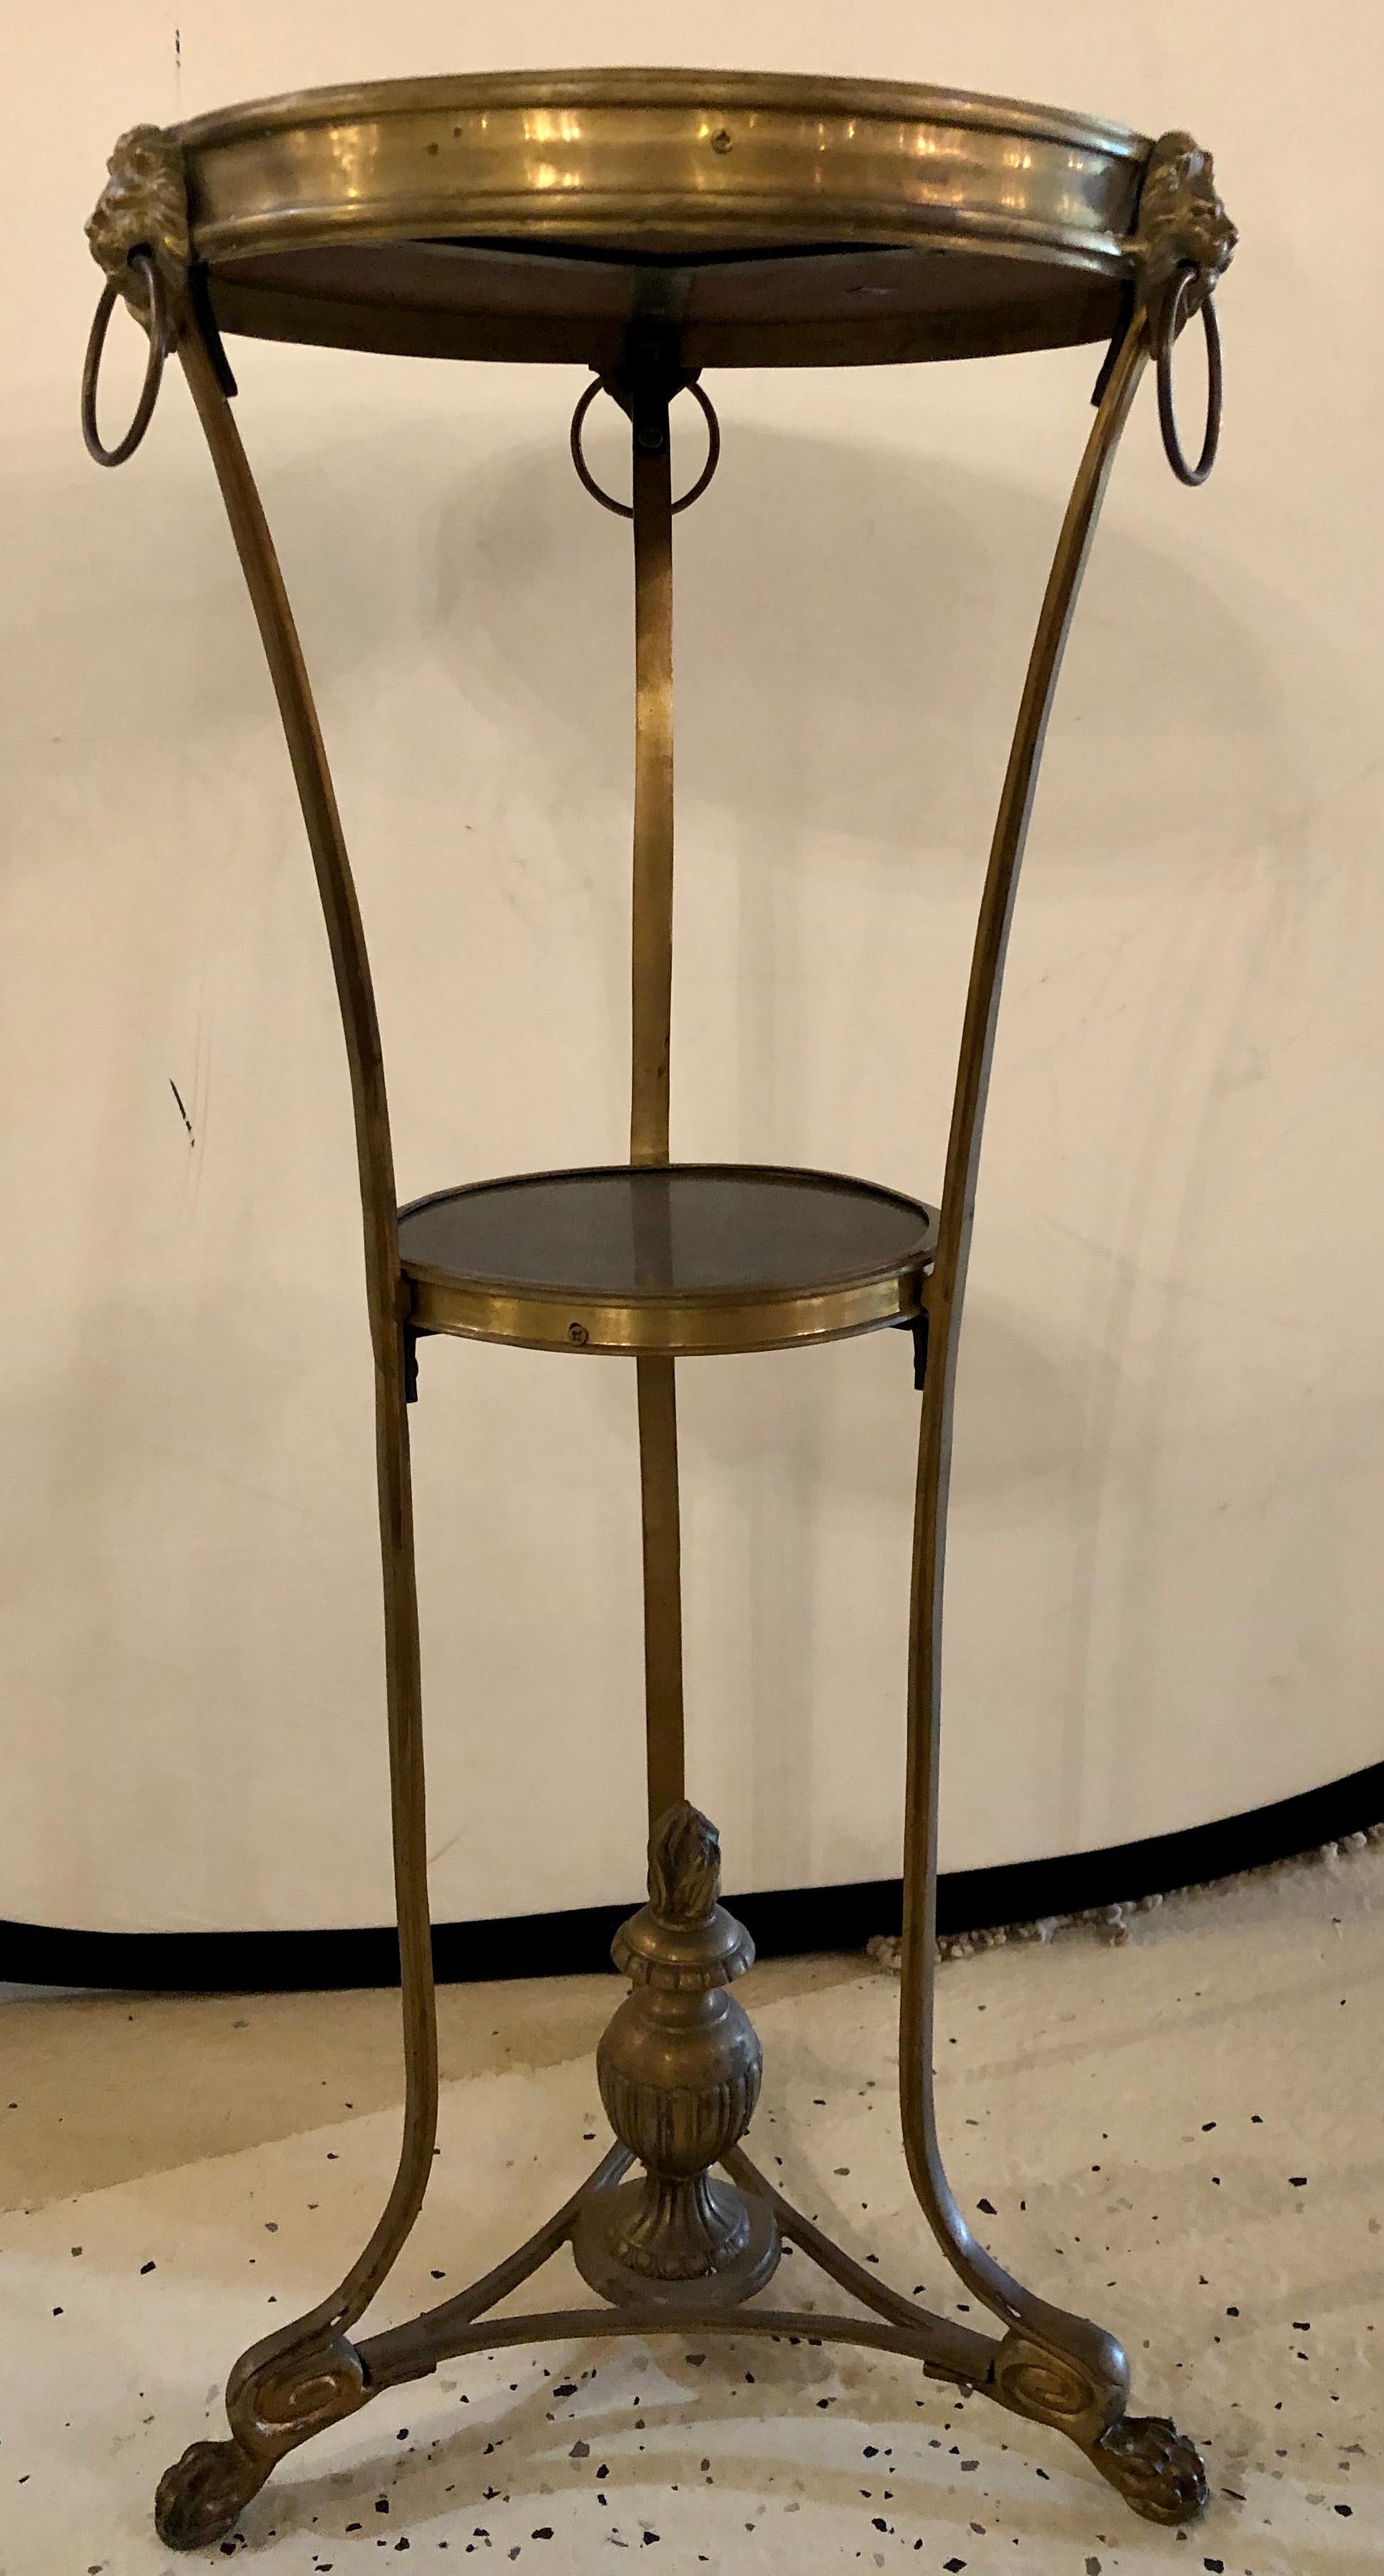 French gilt bronze and black marble round gueridon or pedestal table in the Empire taste with lion ring handles. The claw foot tri pod base having a center finial undercarriage leading to a set of curved bronze legs having a middle shelf with a